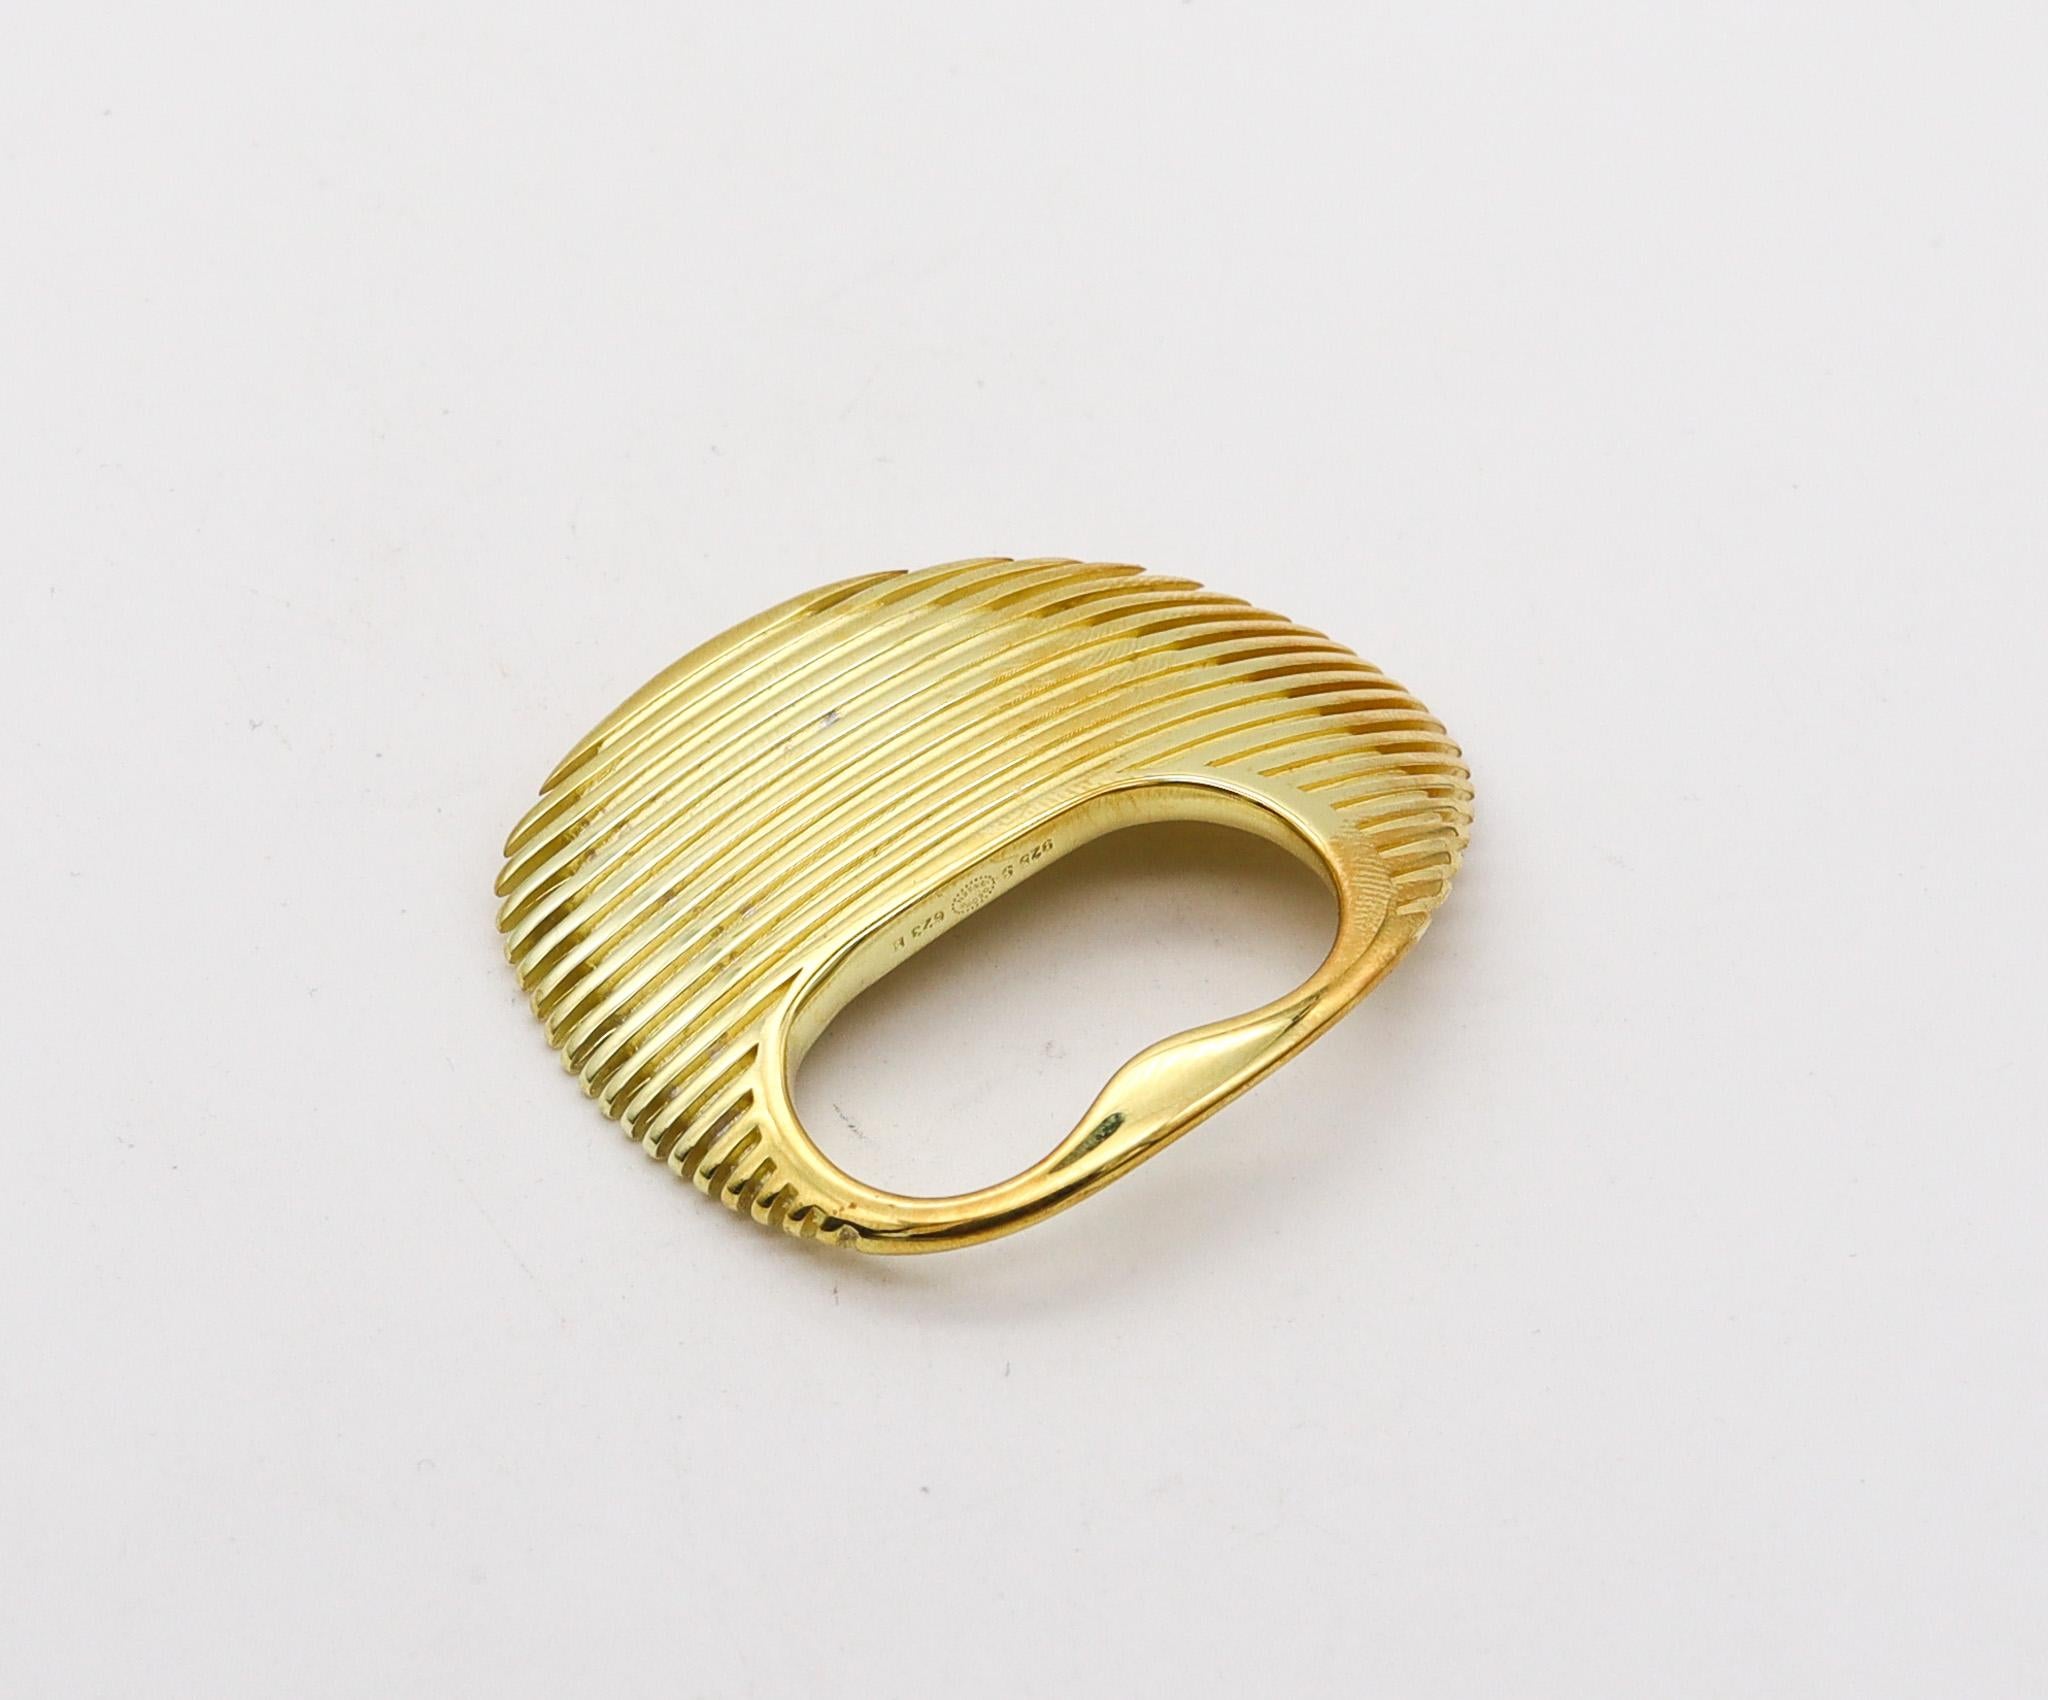 Lamellae ring designed by Zaha Hadid (1950-2016) for Georg Jensen.

This sculptural double fingers ring is part of the Lamellae collection, created exclusively for Georg Jensen, by the famed Iraqi-born British architect Zaha Hadid. This exceptional